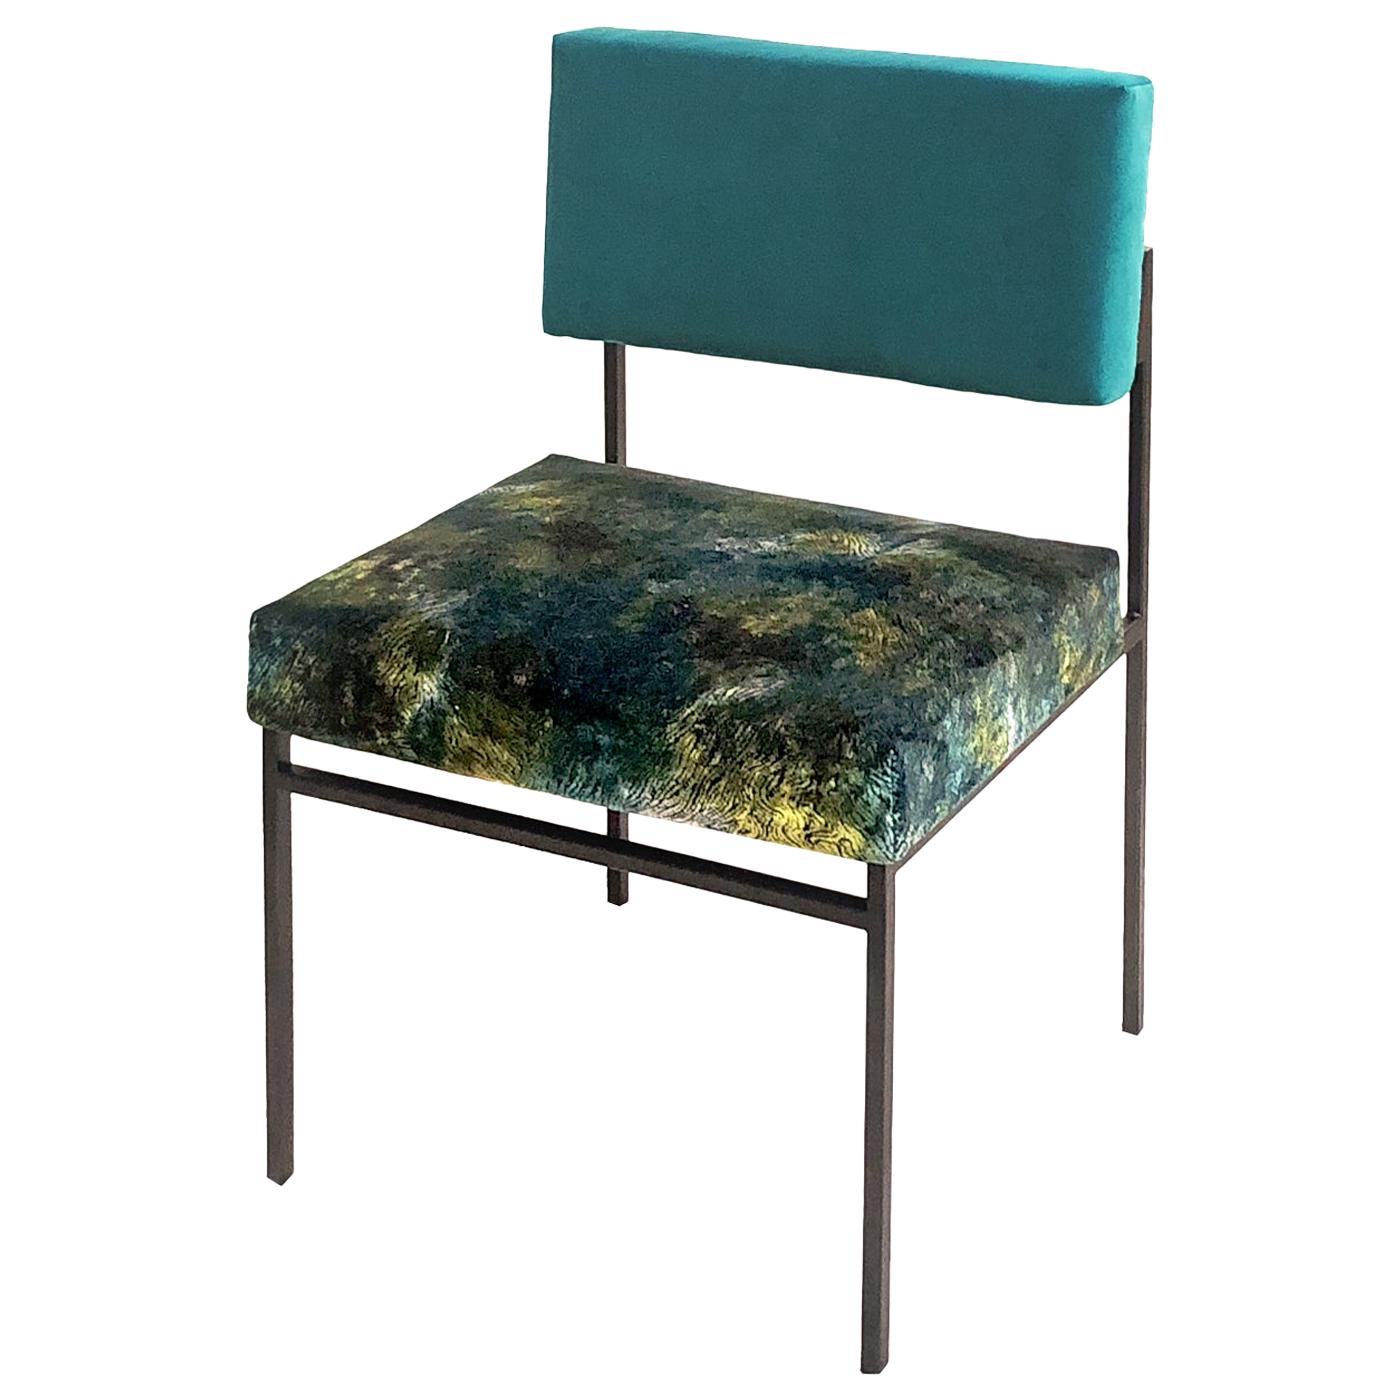 Aurea Green Velvet Chair by CtrlZak and Davide Barzaghi For Sale